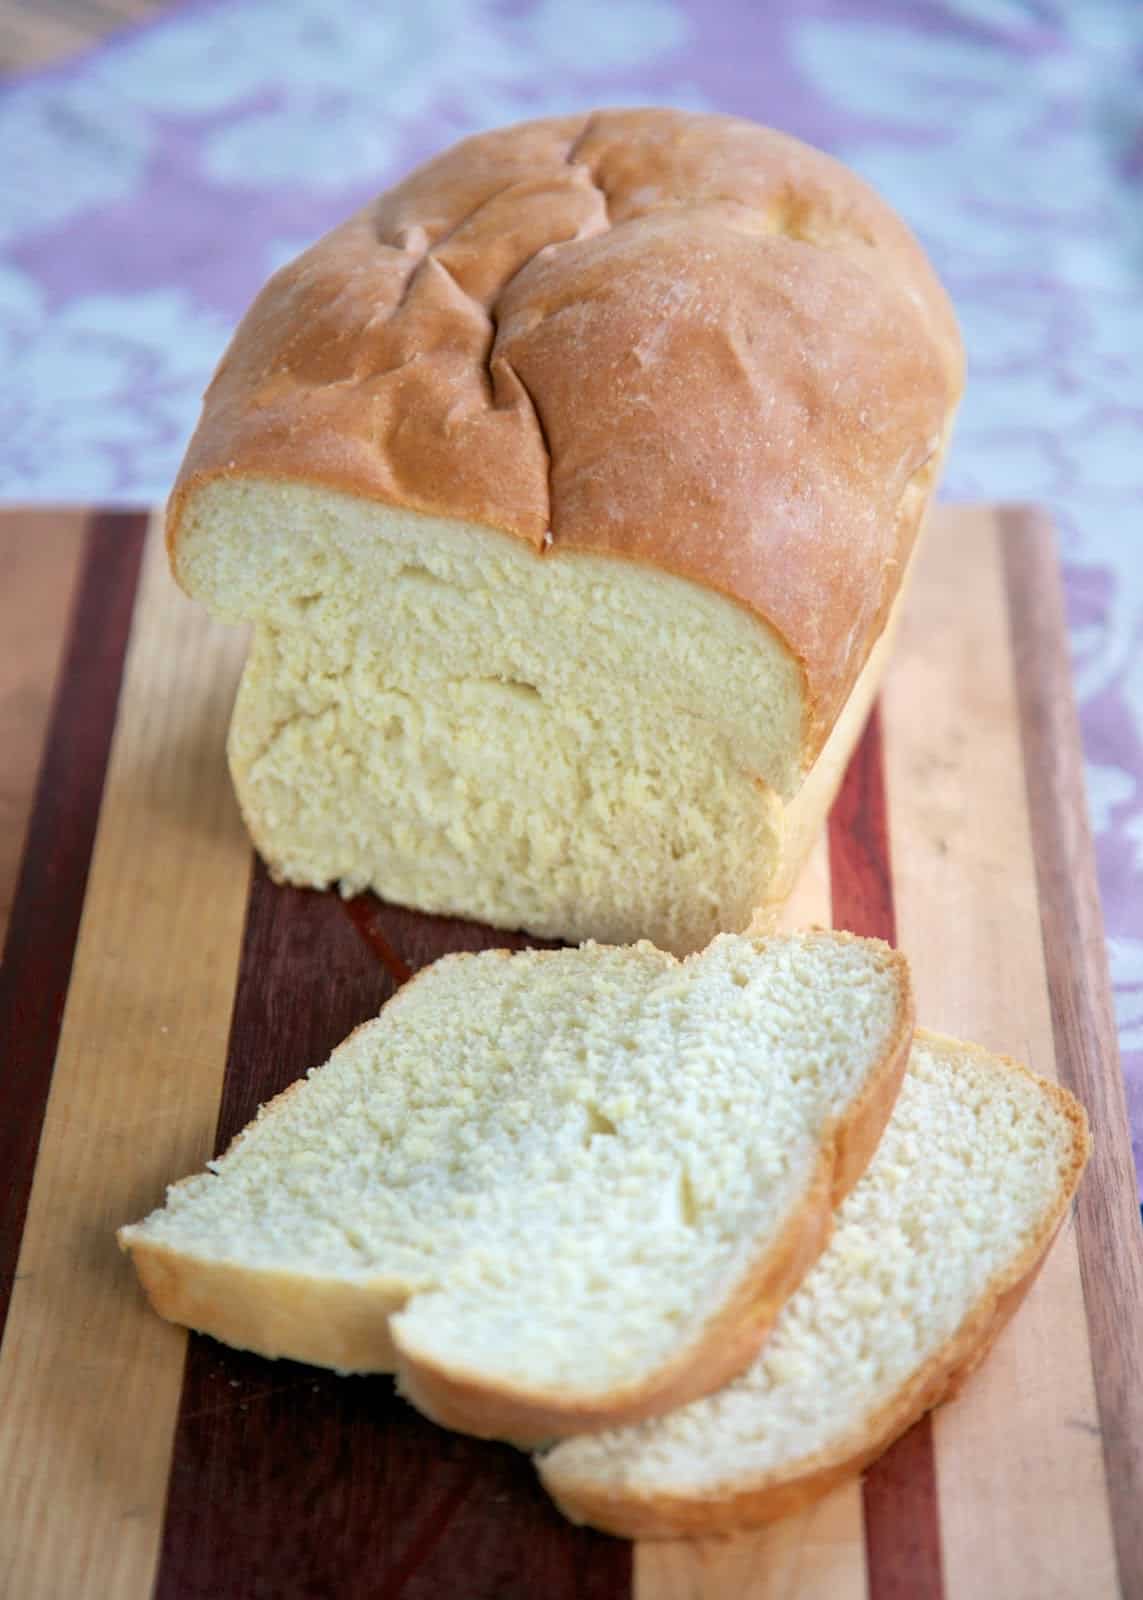 Amish White Bread - easy homemade bread recipe that tastes DELICIOUS!!! Recipe makes two loaves. Can eat one and freezer one for later. Water, sugar, yeast, salt, oil and flour. Ready to eat in about 2 hours!! #bread #homemadebread